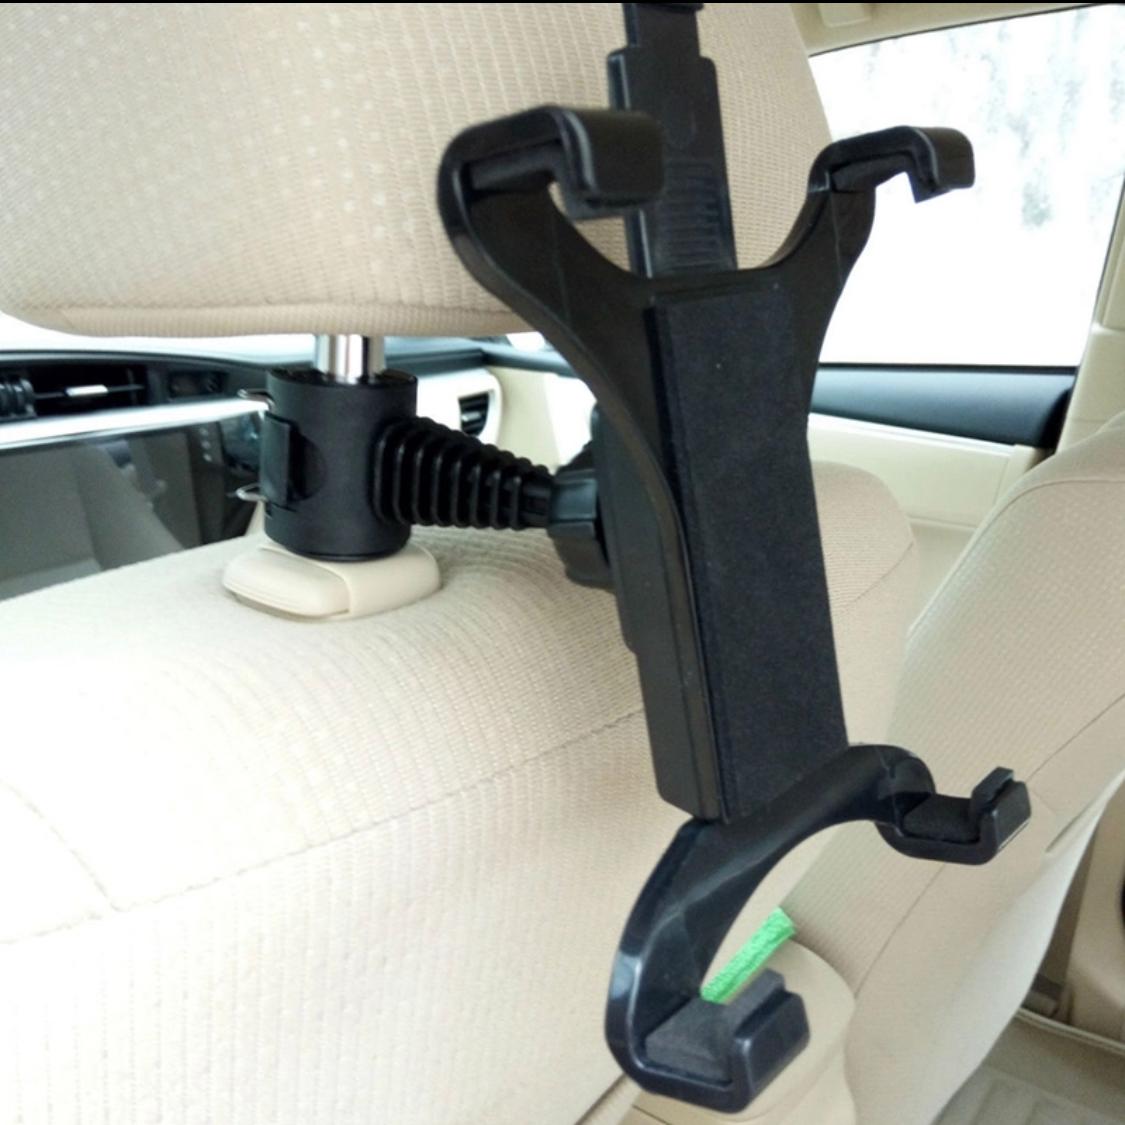 Car Back Seat Headrest Mount Holder Stand For 7-10 Inch Tablet For IPAD 